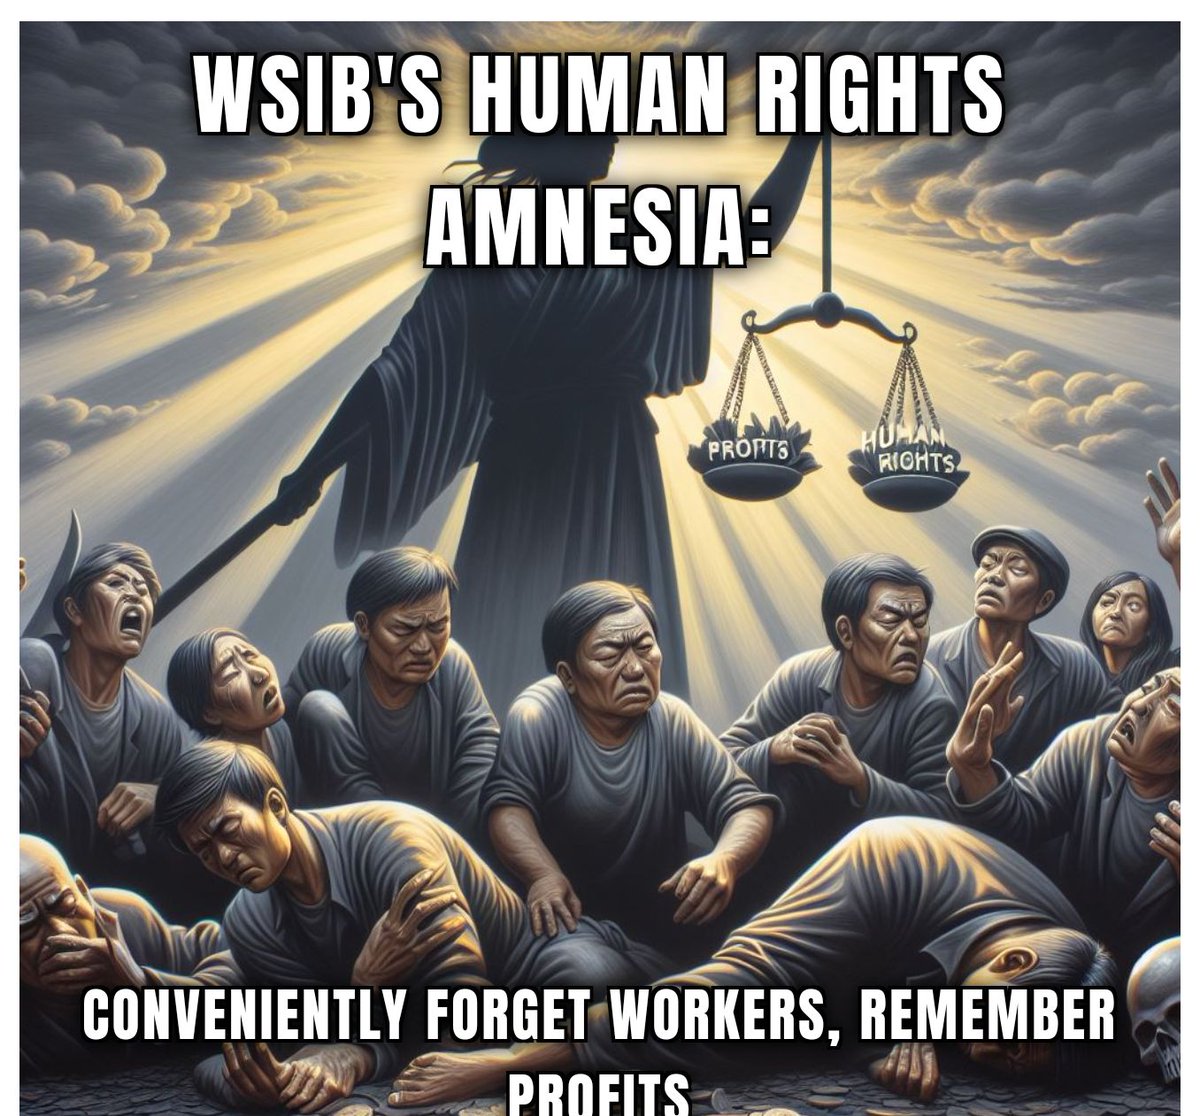 WSIB's human rights amnesia: conveniently forget workers, remember profits.
 It's time to remind them of their duty to workers ! #InjuredWorkers #HumanRights #ProfitOverPeople